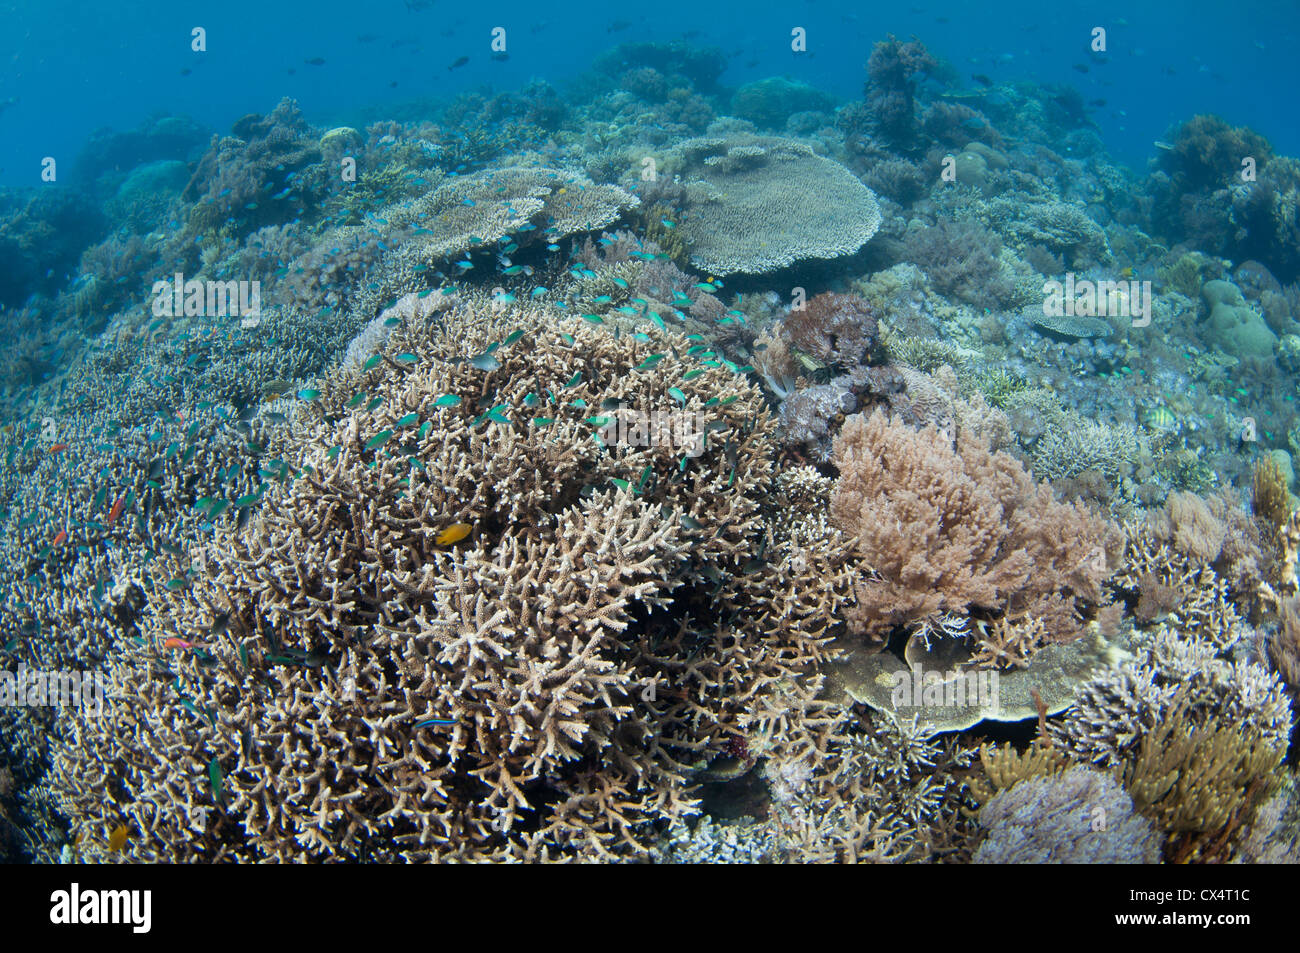 A shallow hard coral garden,several species of hard coral including finger and plate corals such as Porites sp., and Acropora Stock Photo